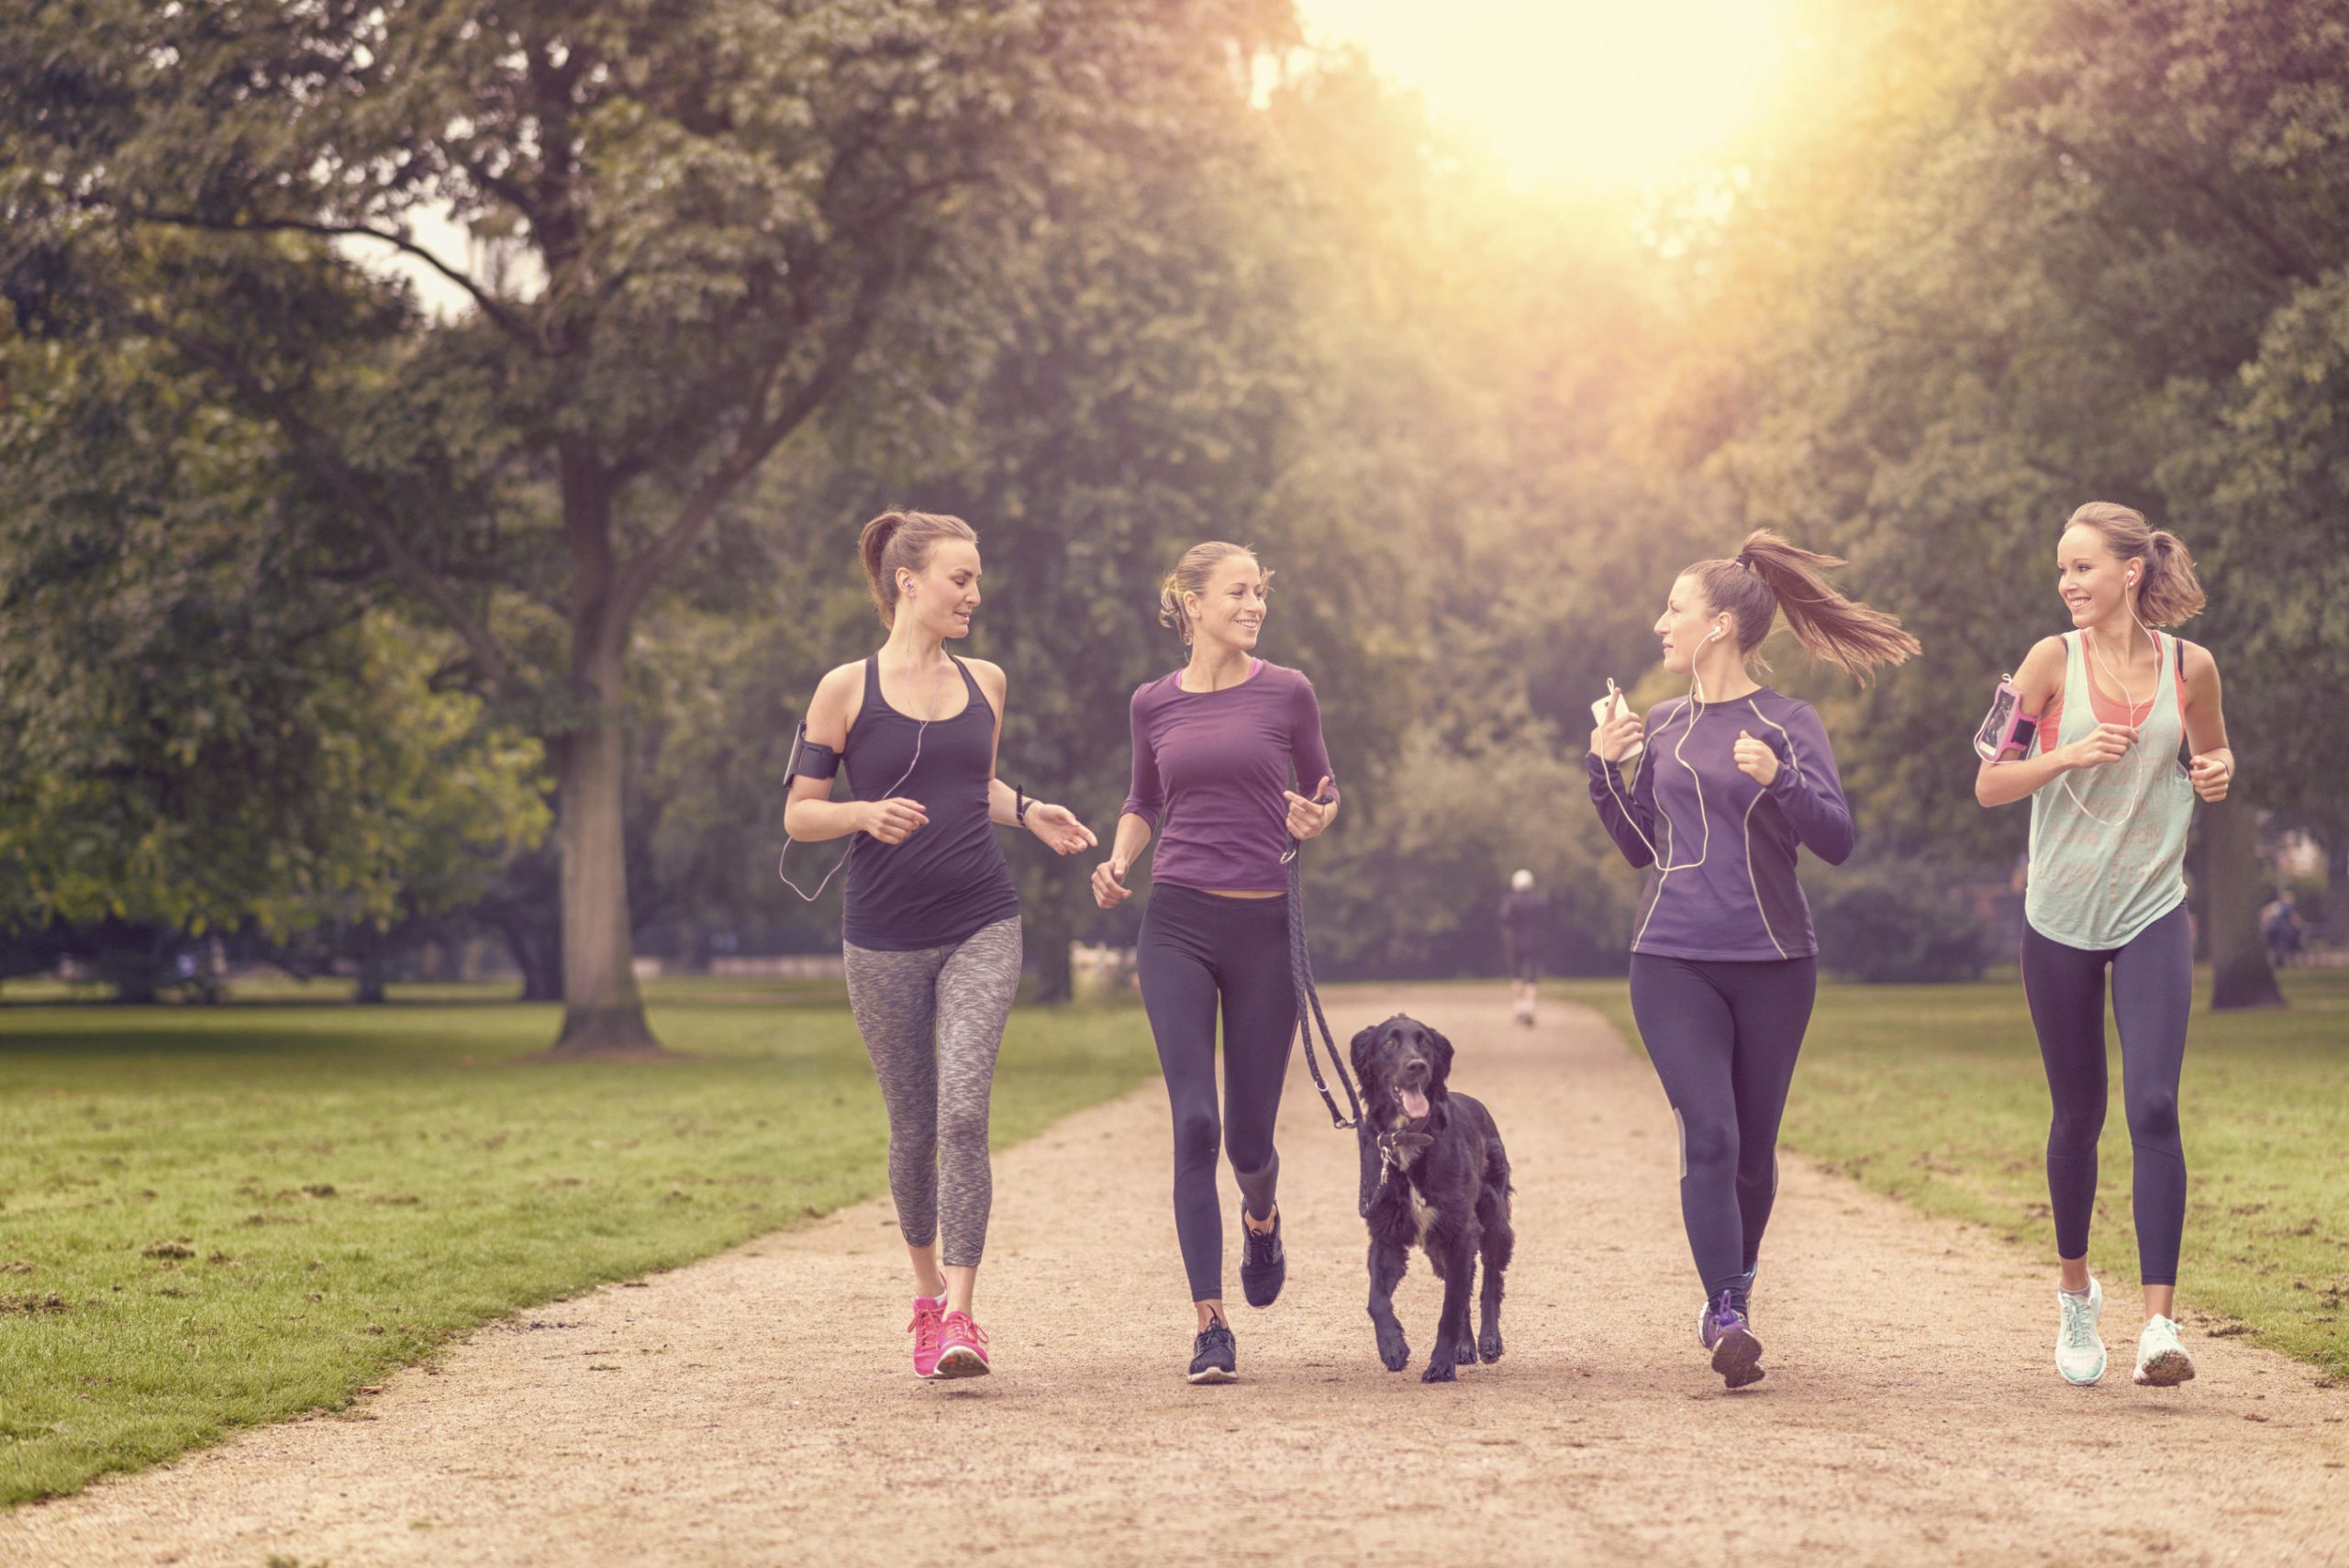 Group of women running with a dog, smiling